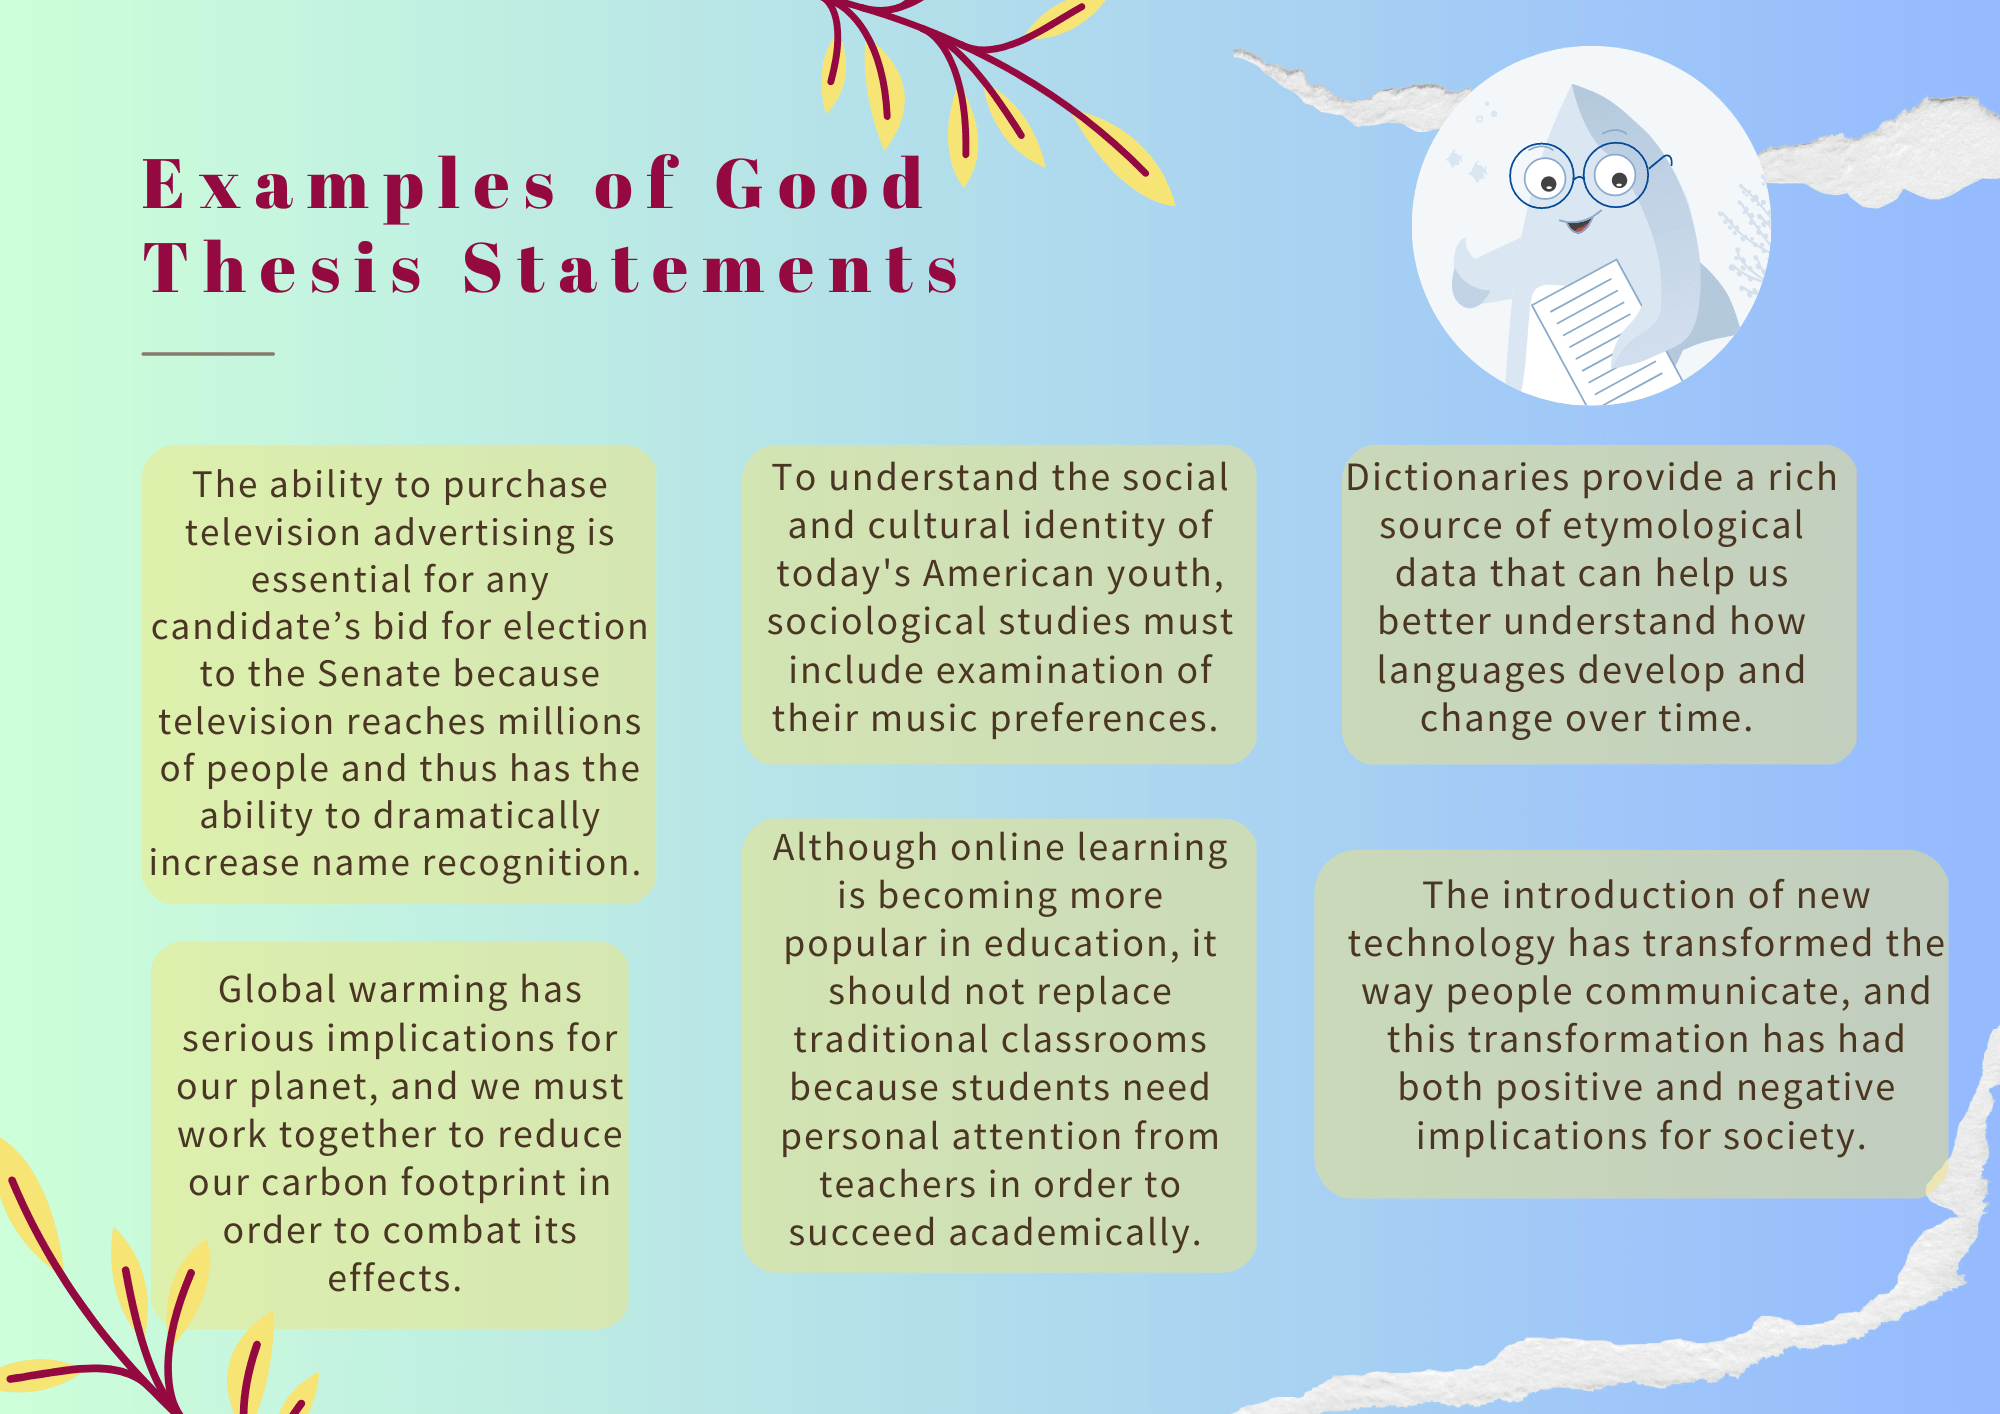 How To Write Strong Thesis Statement